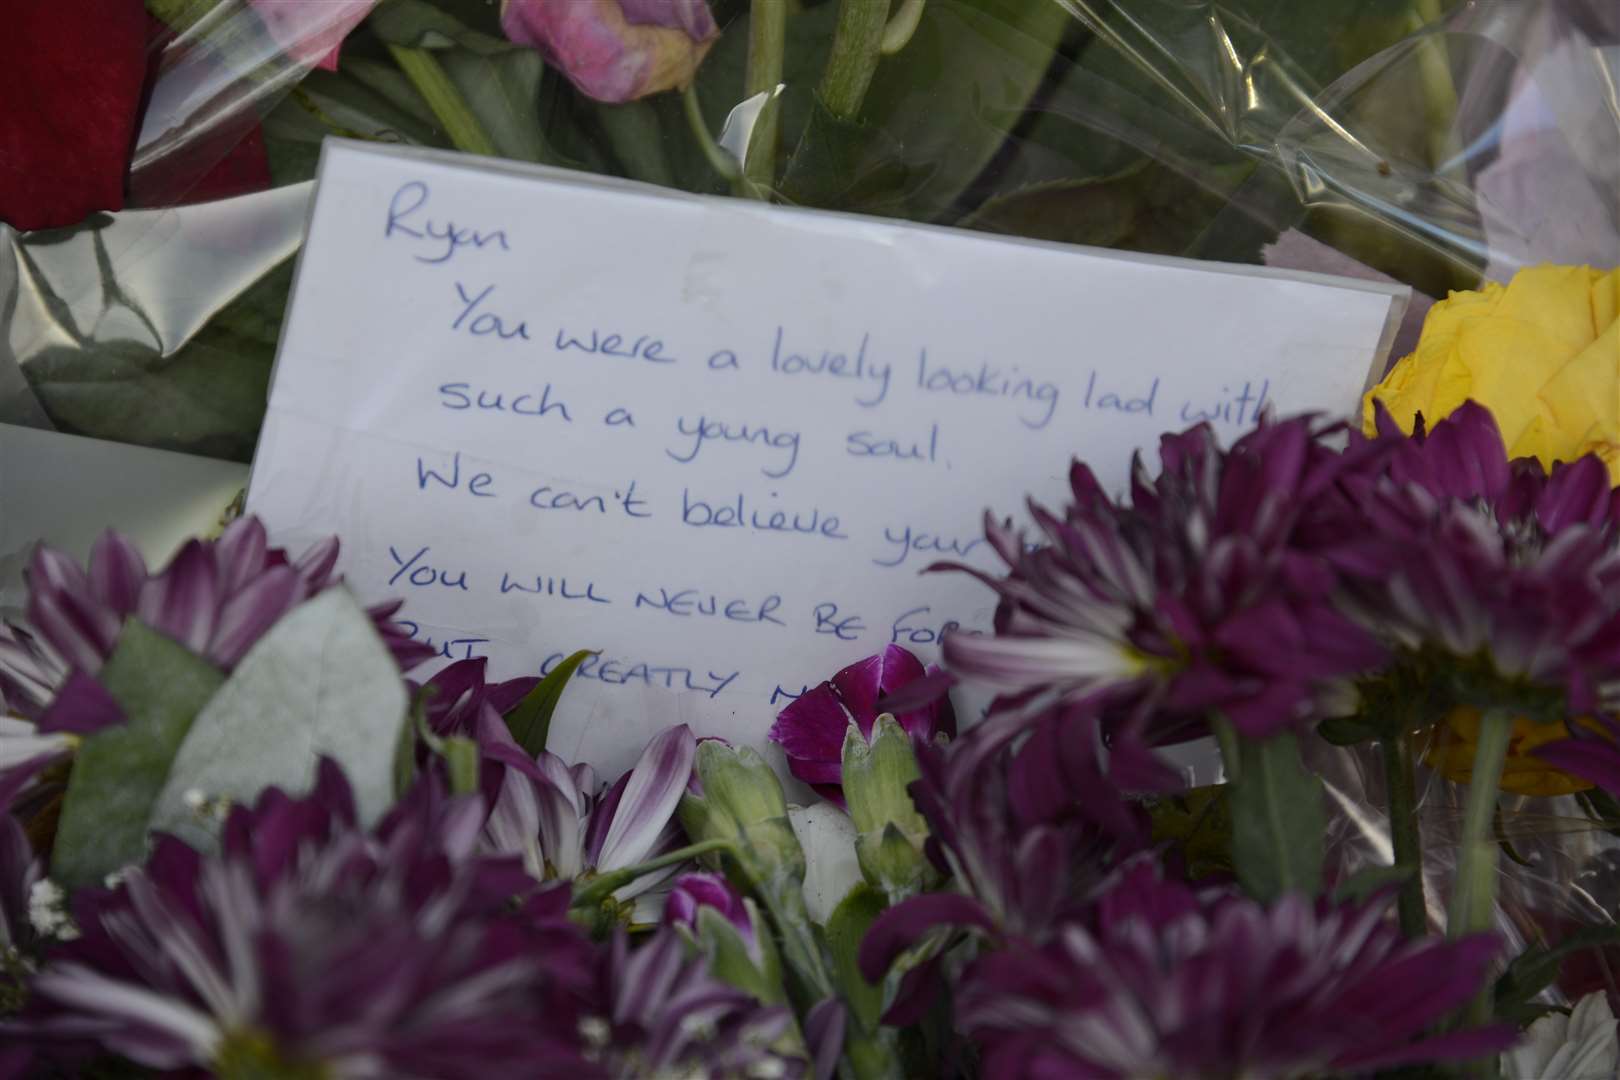 Floral tributes to Ryan were laid on the pavement near the Panorama Building. Picture: Paul Amos